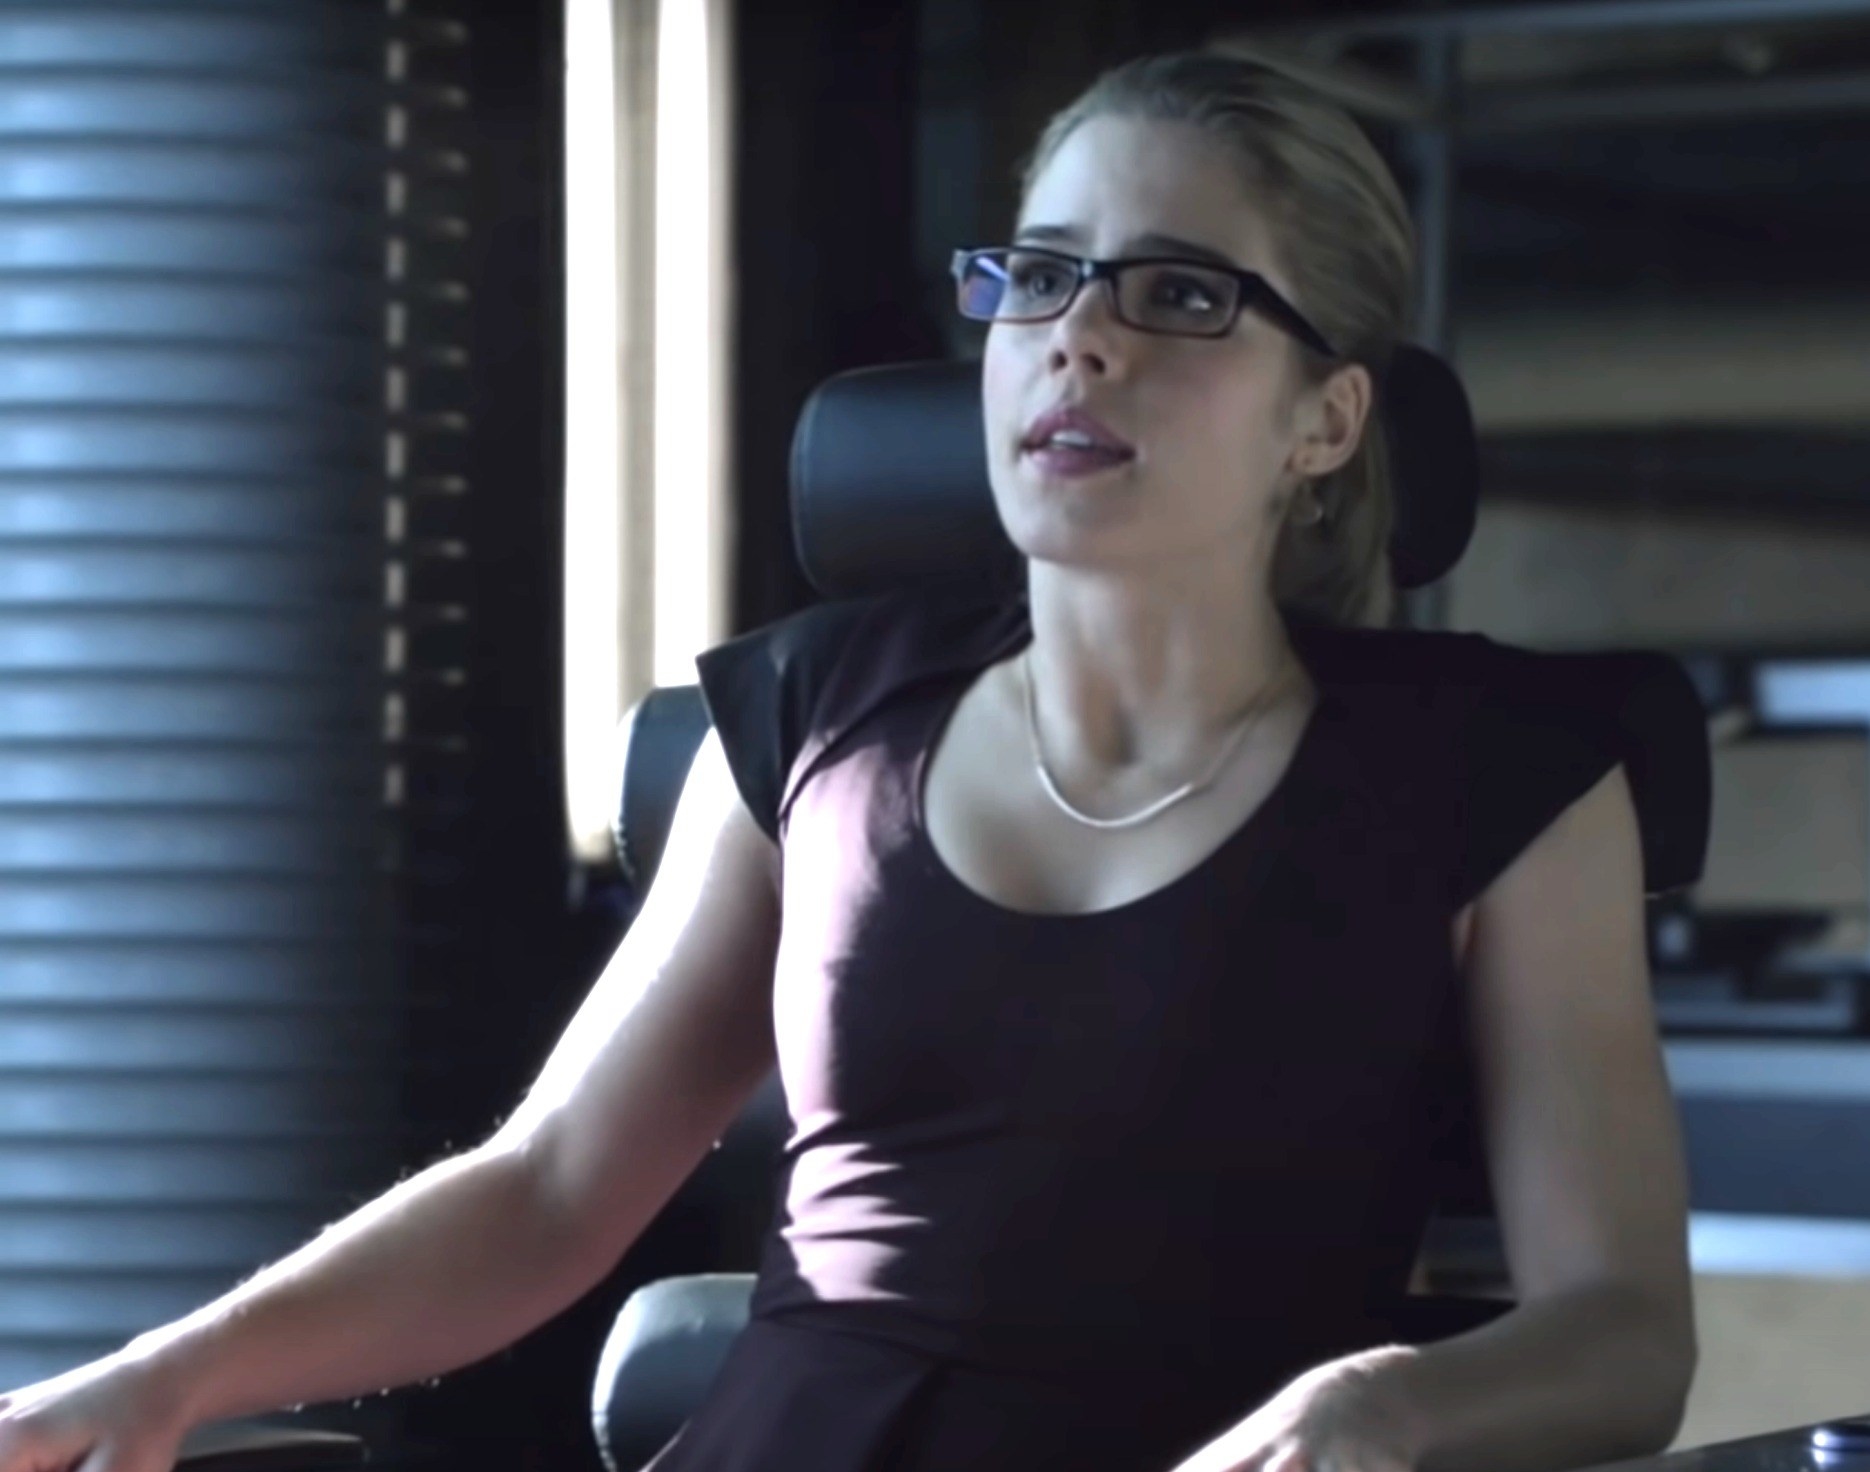 felicity sitting at a computer